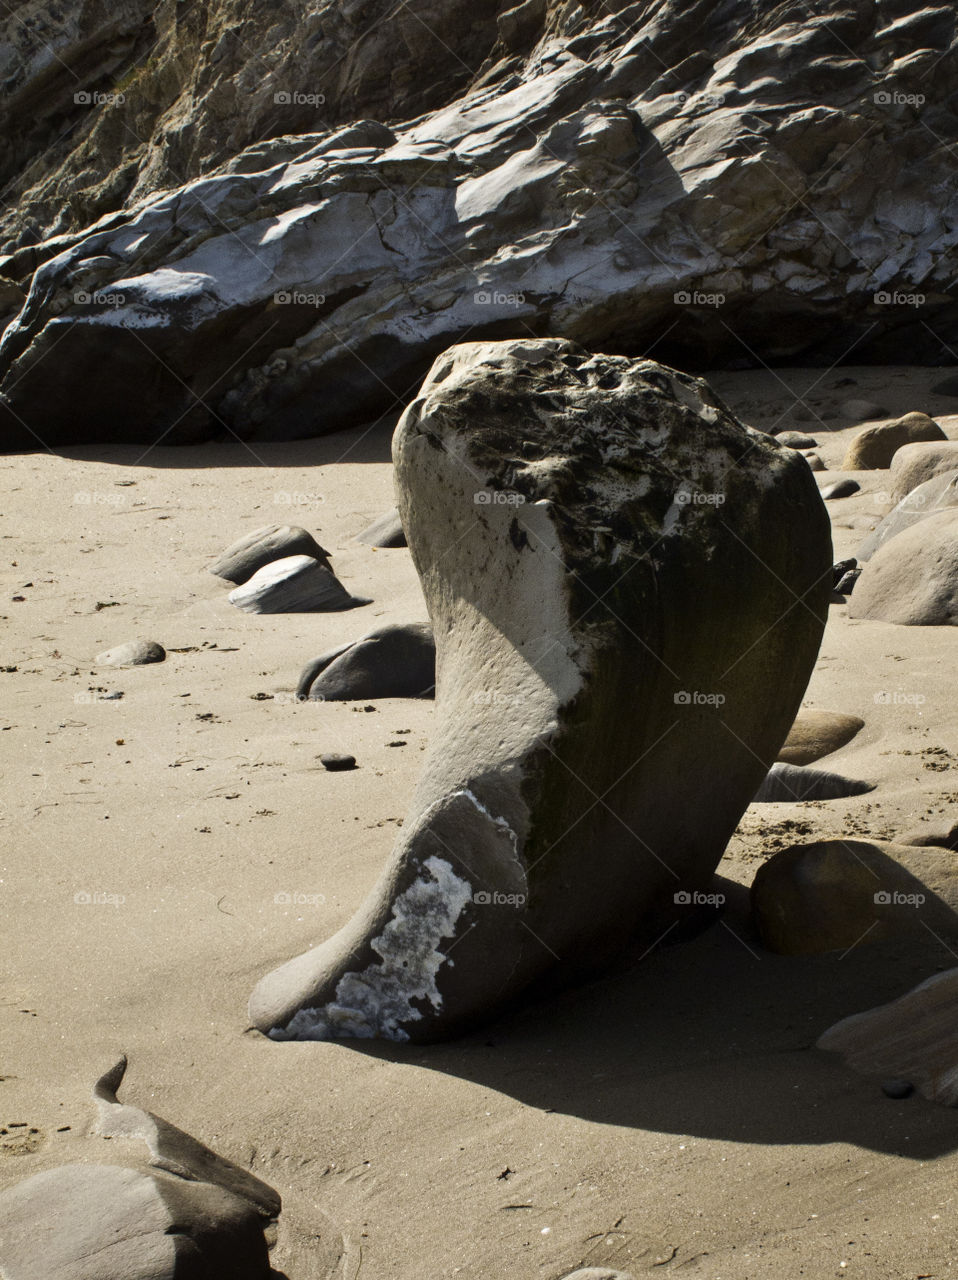 A rock formation on Shoreline Beach in Santa Barbara. One of nature's abstract sculptures.